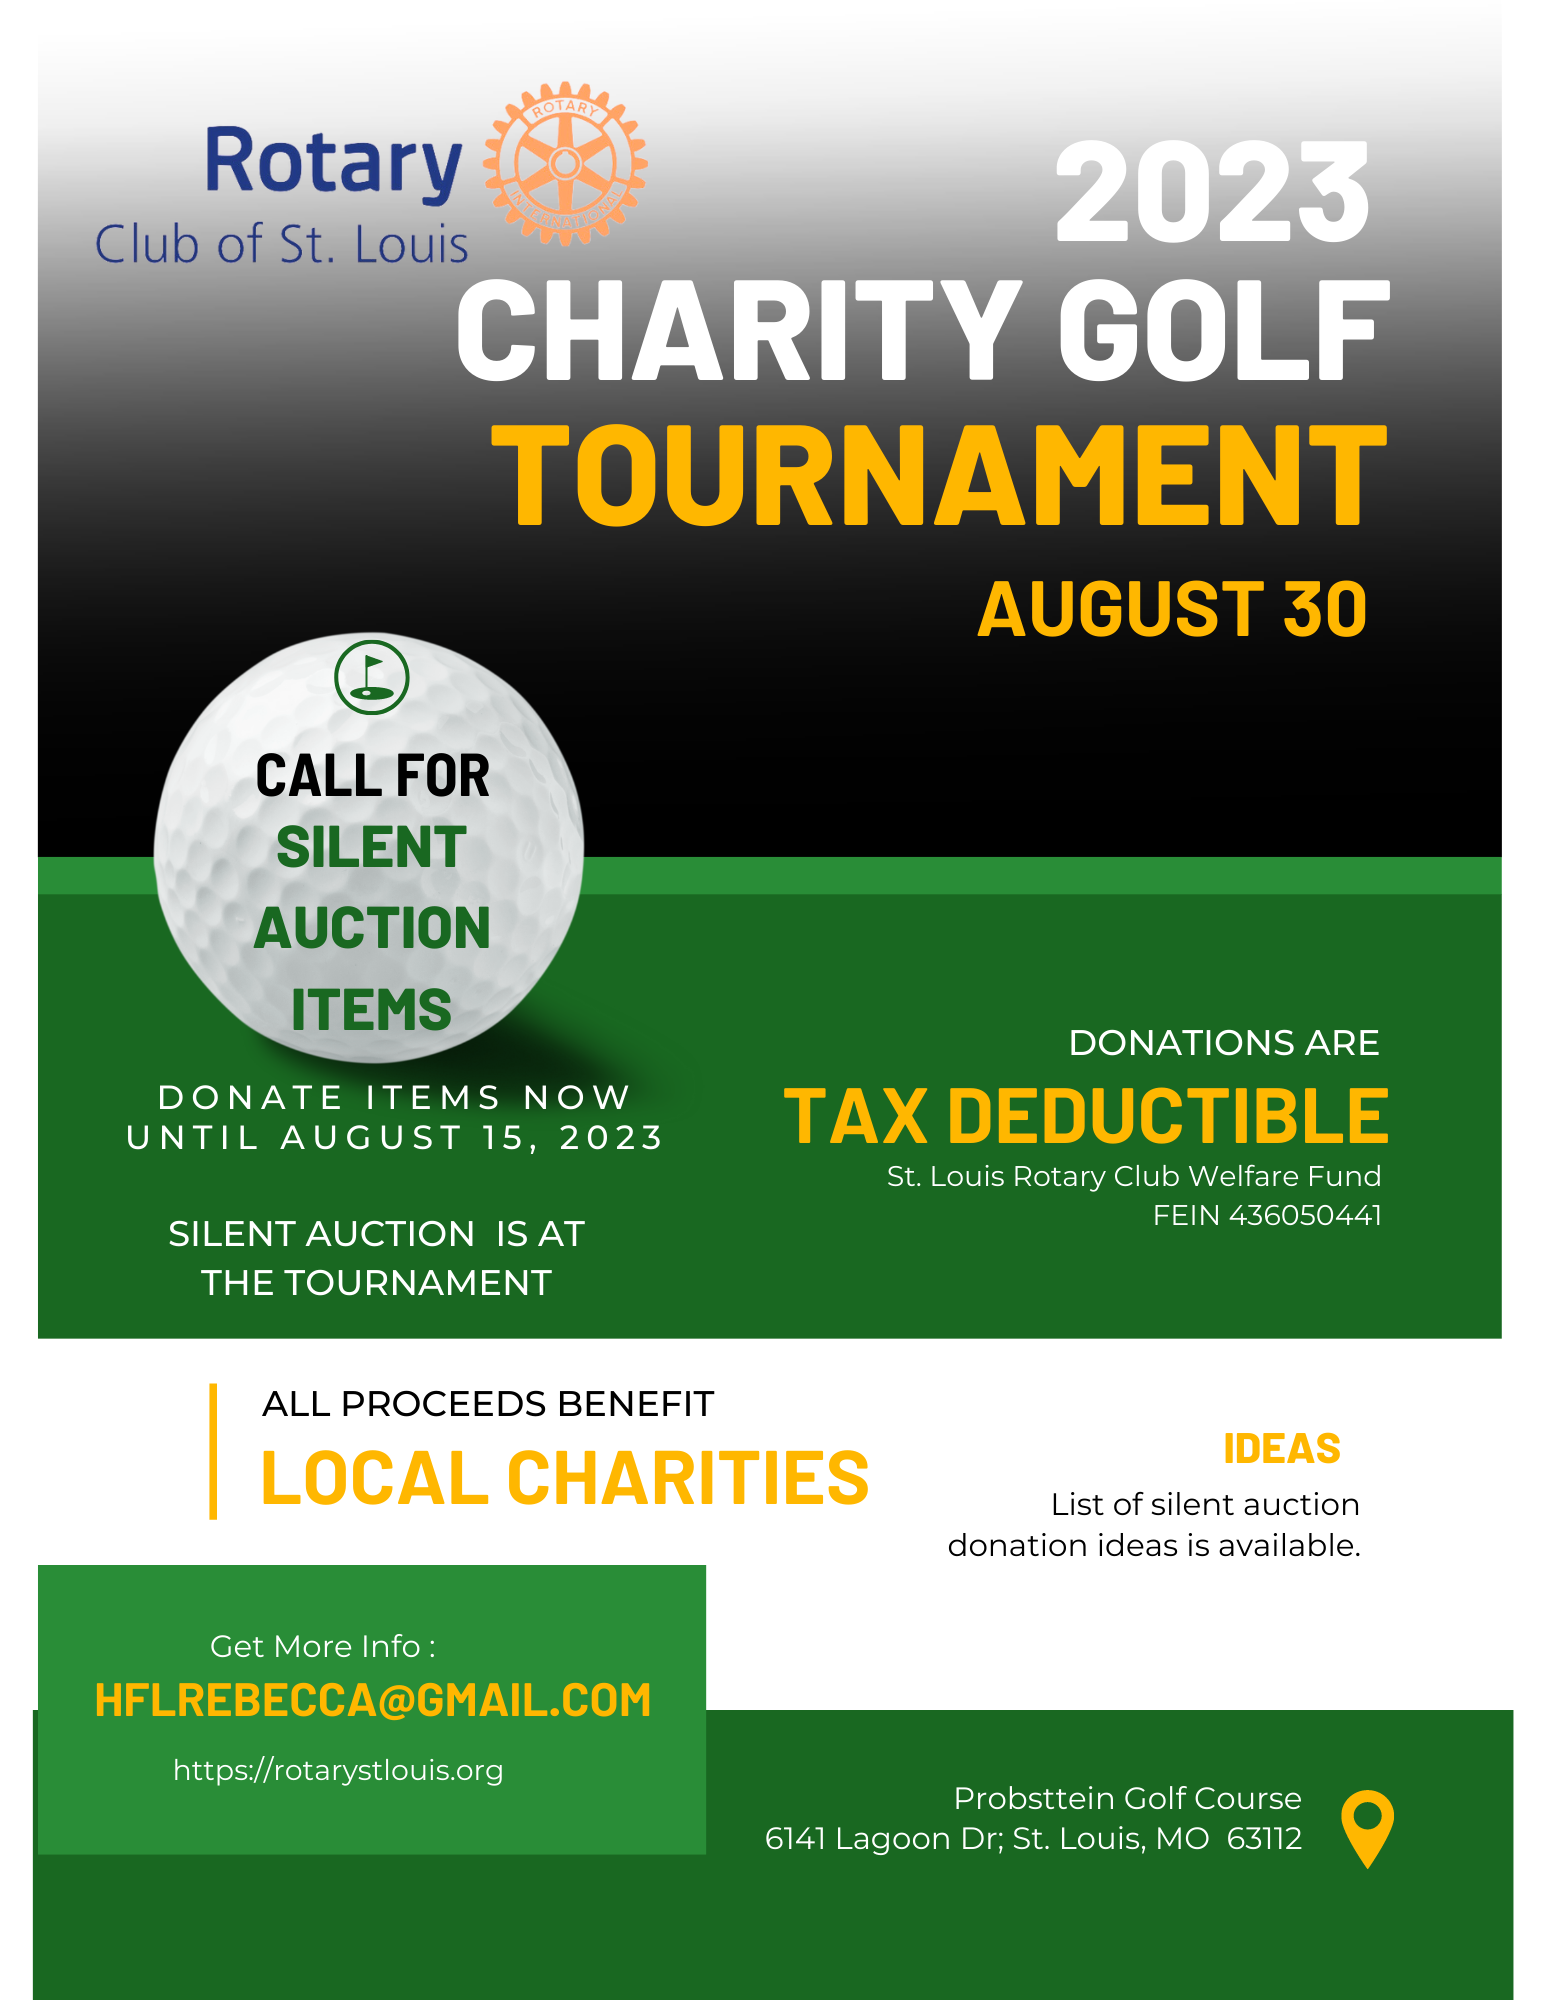 Call for donations for silent auction at Charity Tourney August 30, 2023